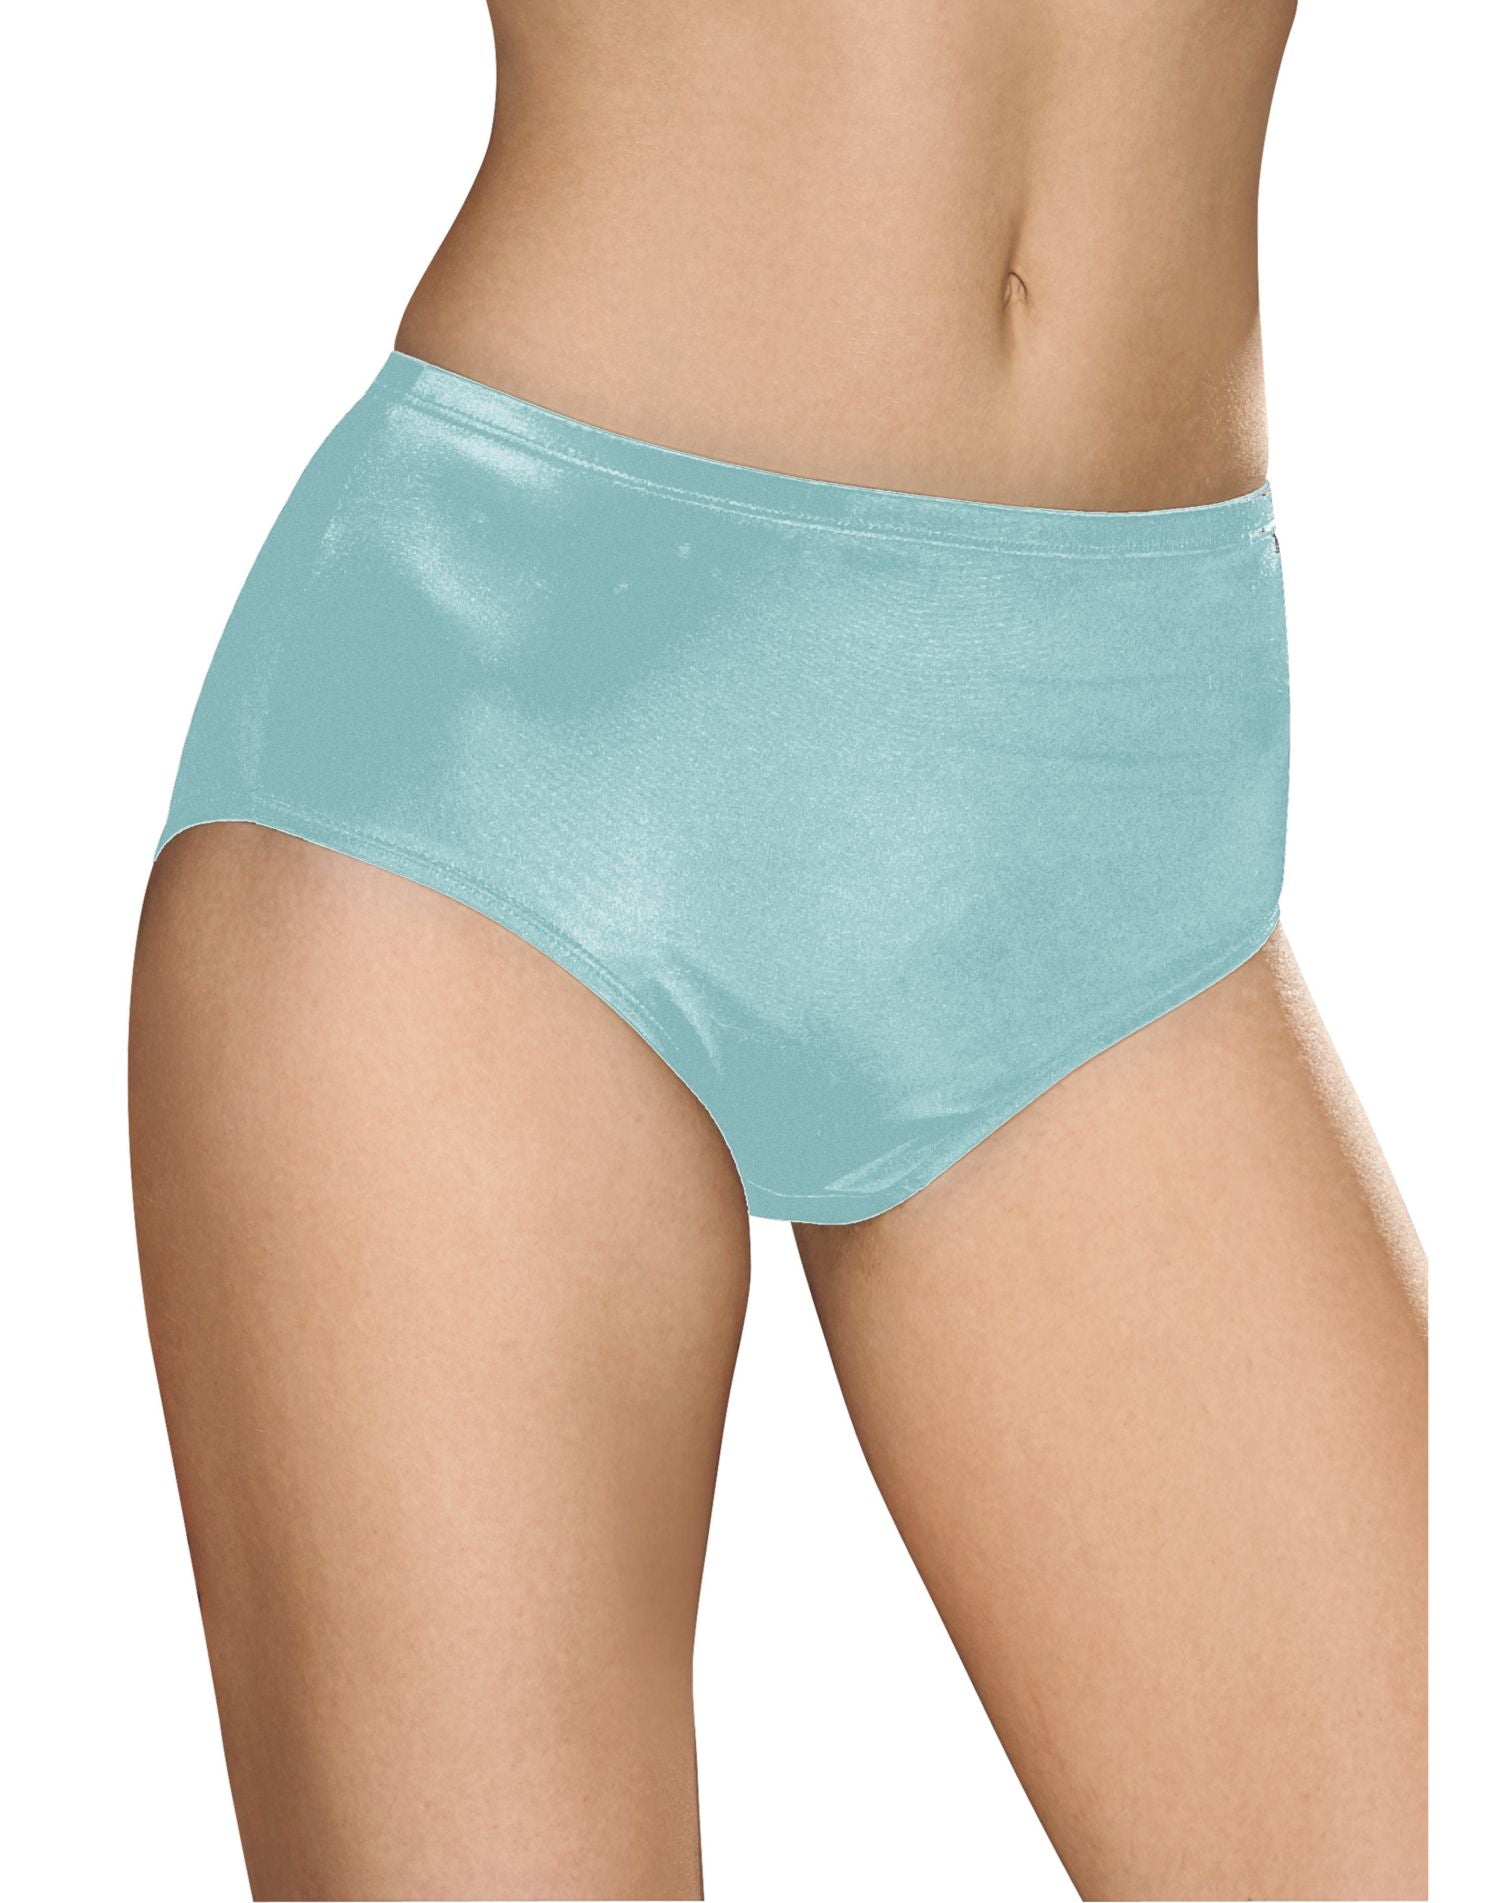 Mix Women''s Cotton Hosiery Undergarments By Lily, Model Name